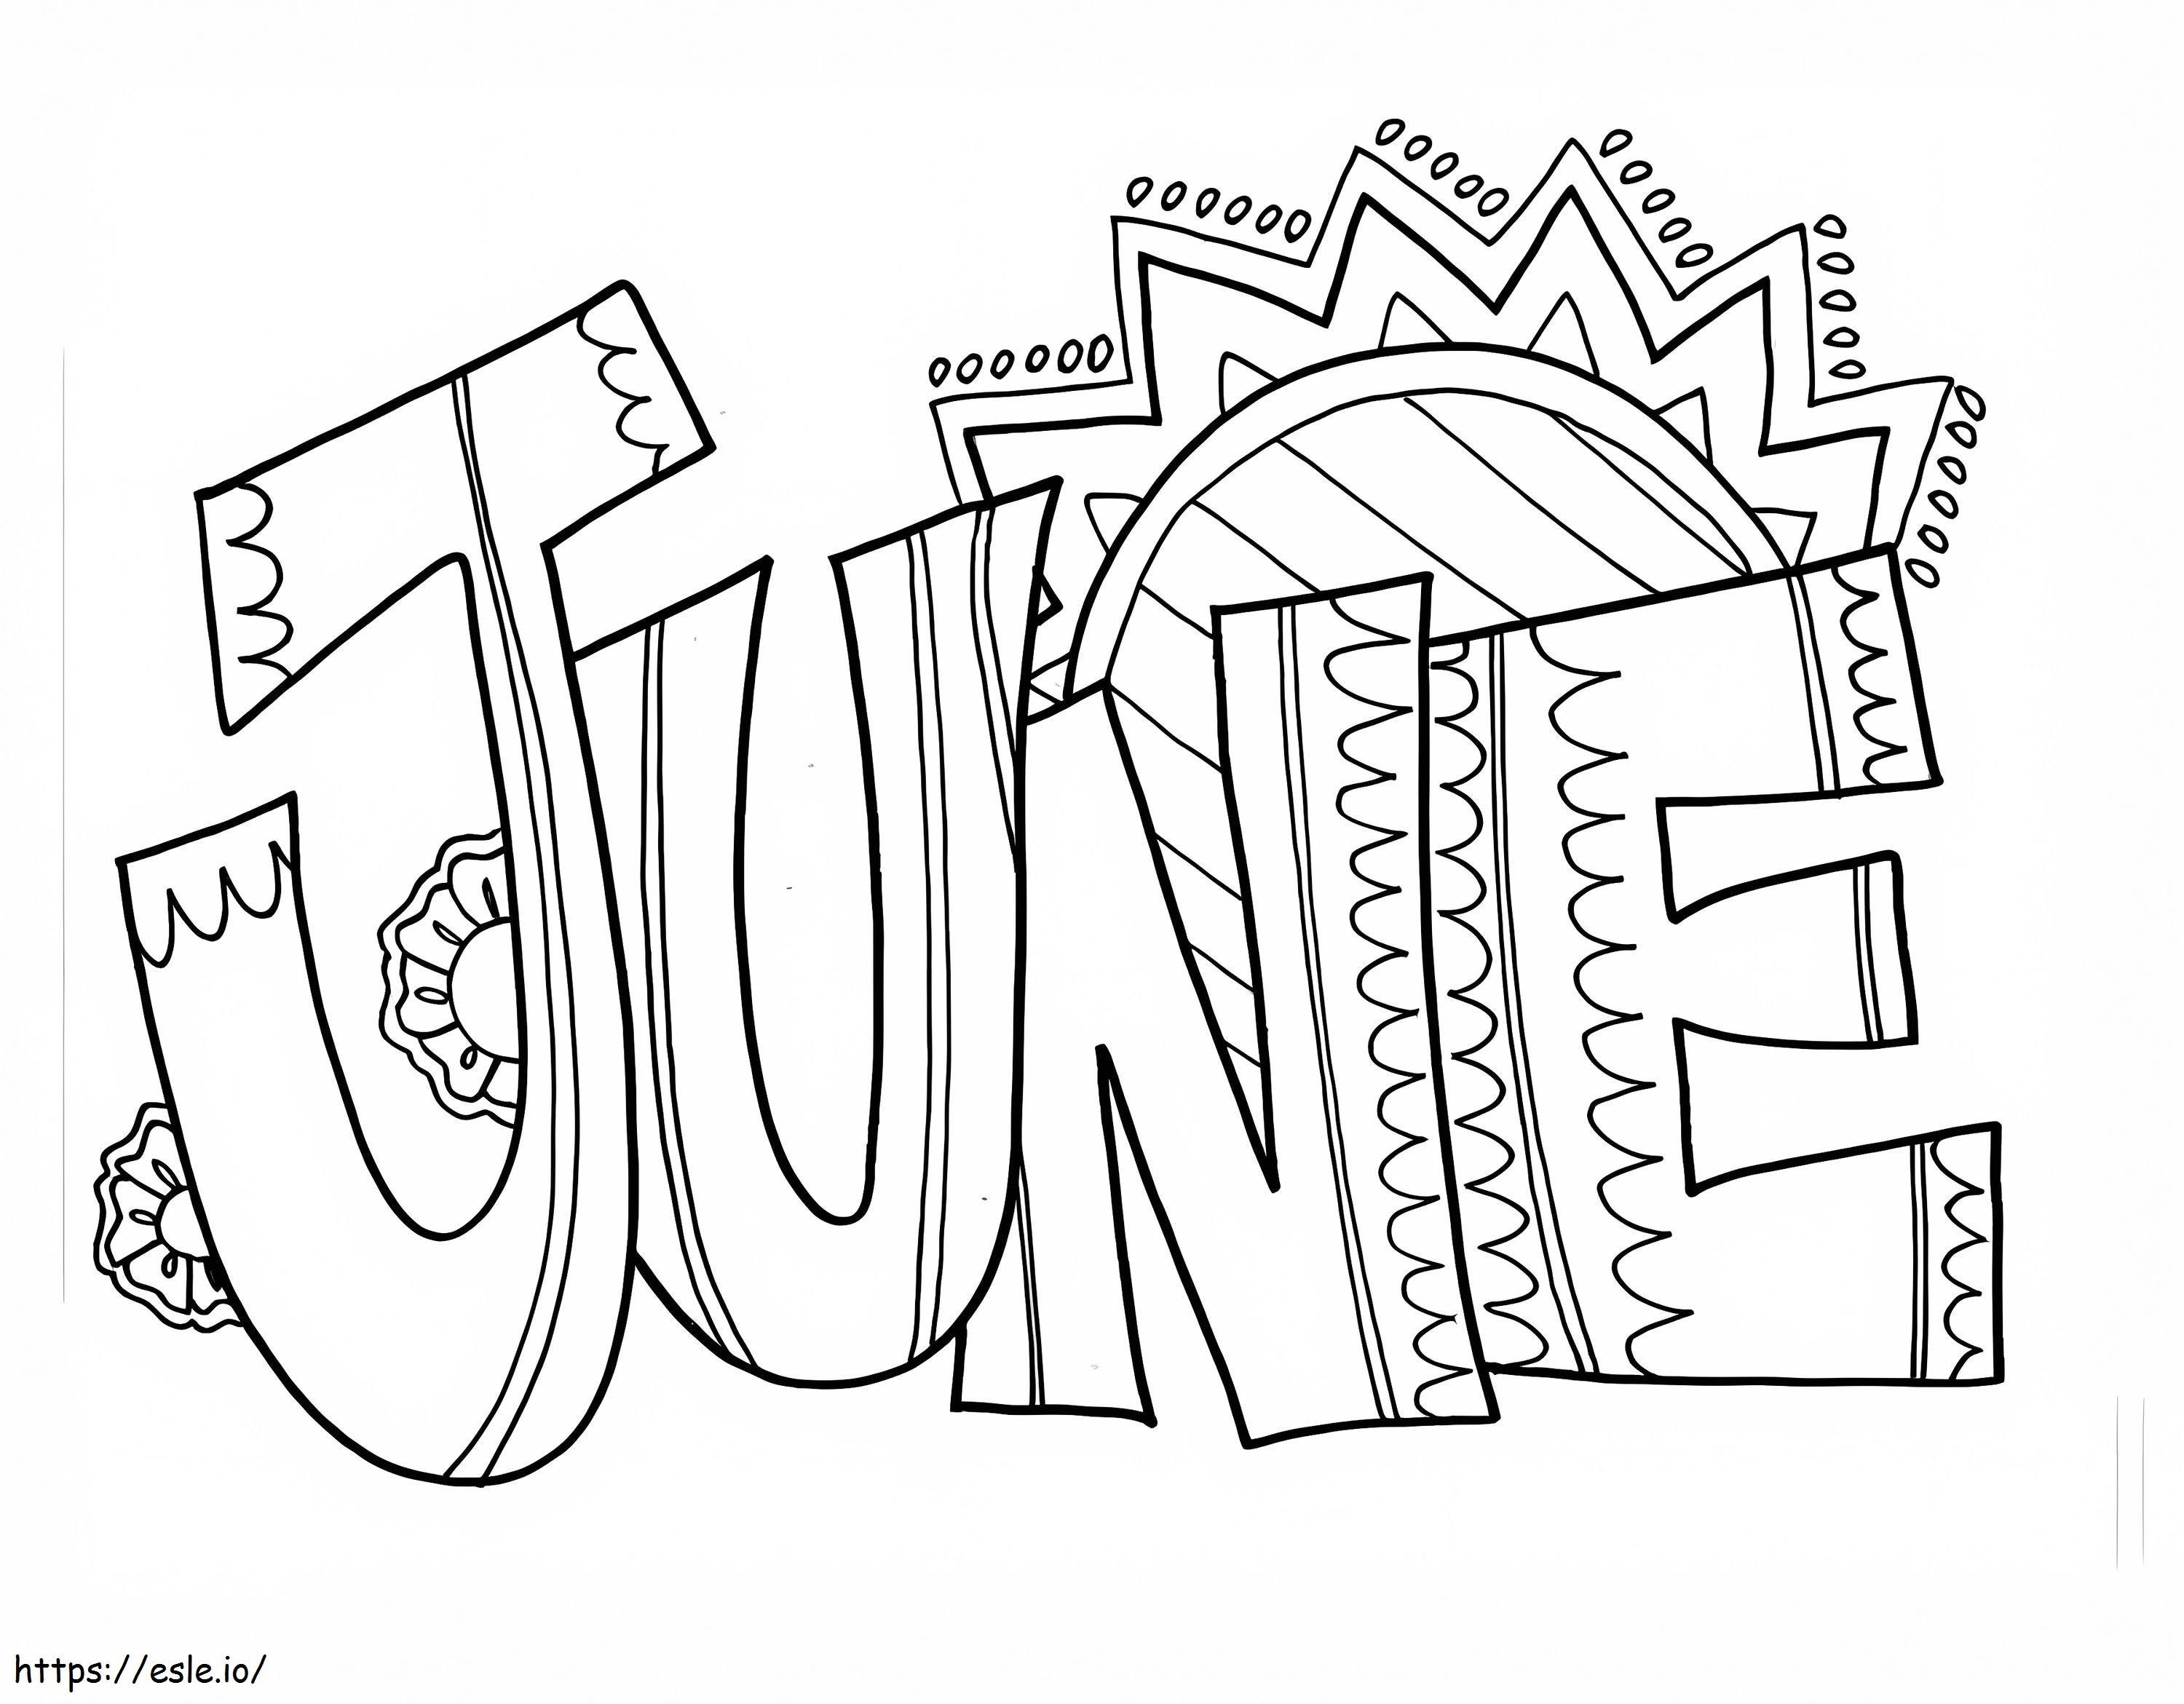 June 2Nd coloring page